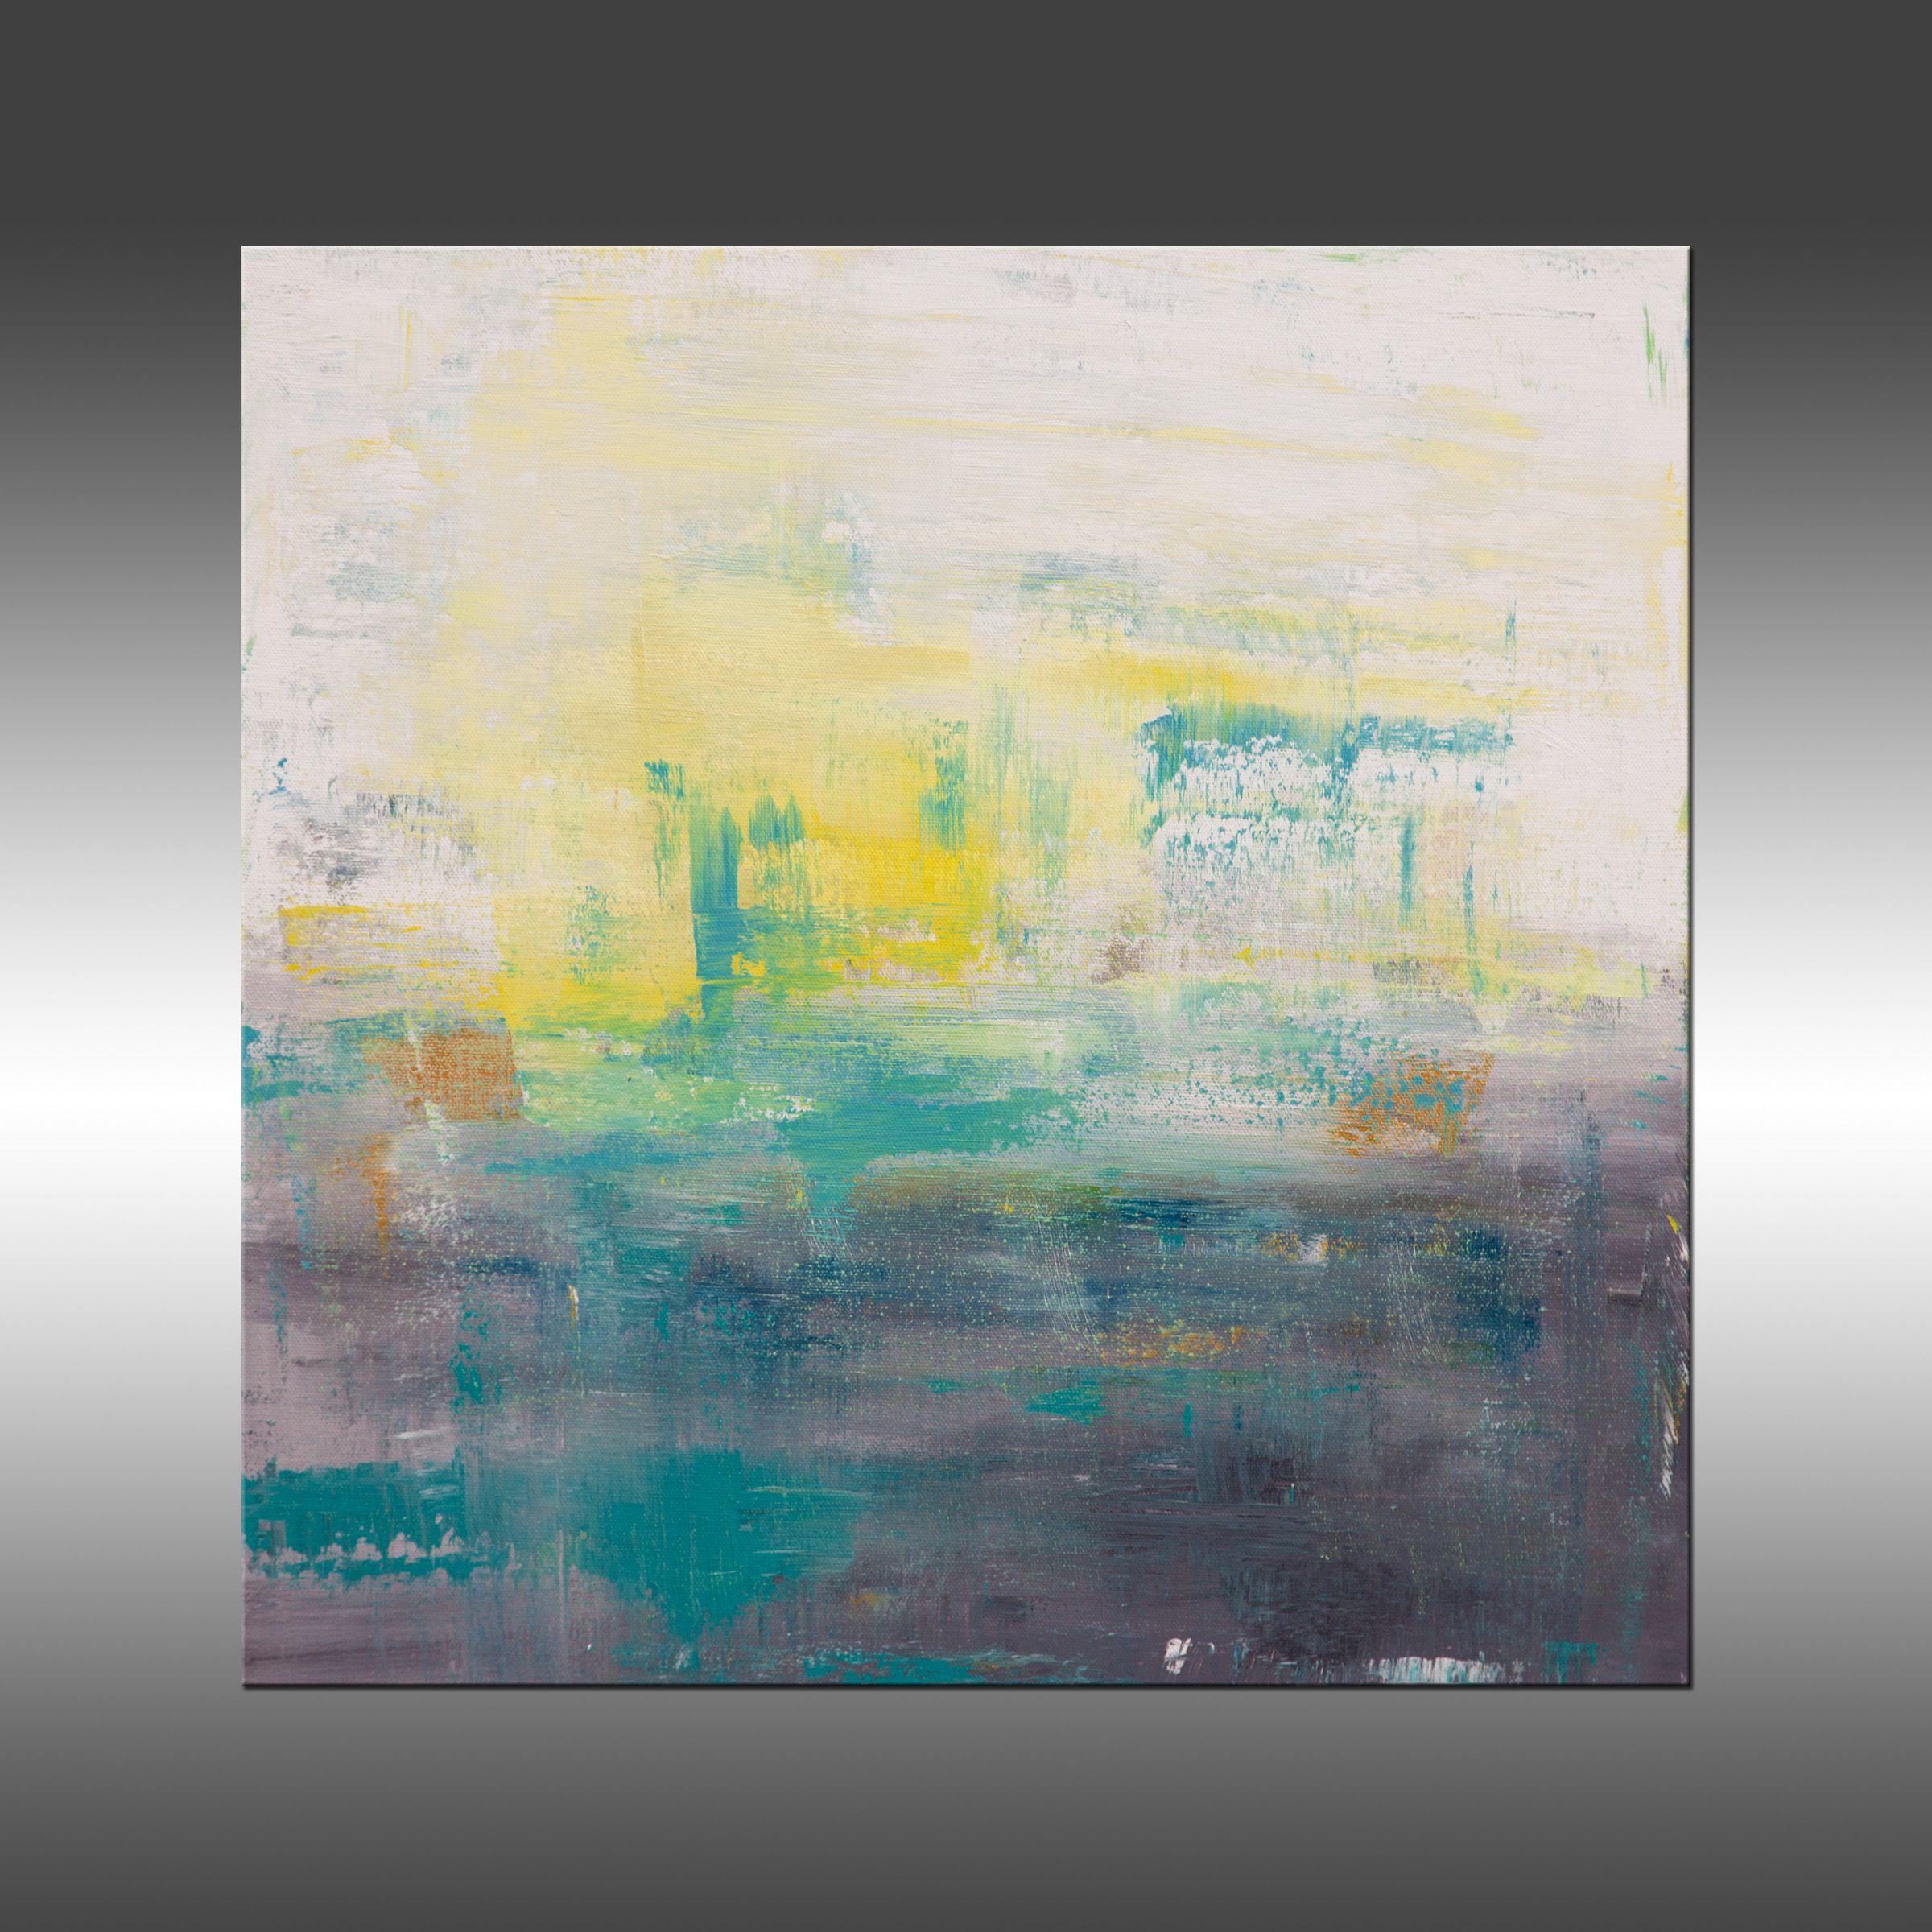 Modern Industrial 49 is an original painting, created with acrylic paint on gallery-wrapped canvas. It has a width of 20 inches and a height of 20 inches with a depth of 1.5 inches (20x20x1.5).    The colors used in the painting are white, gray,